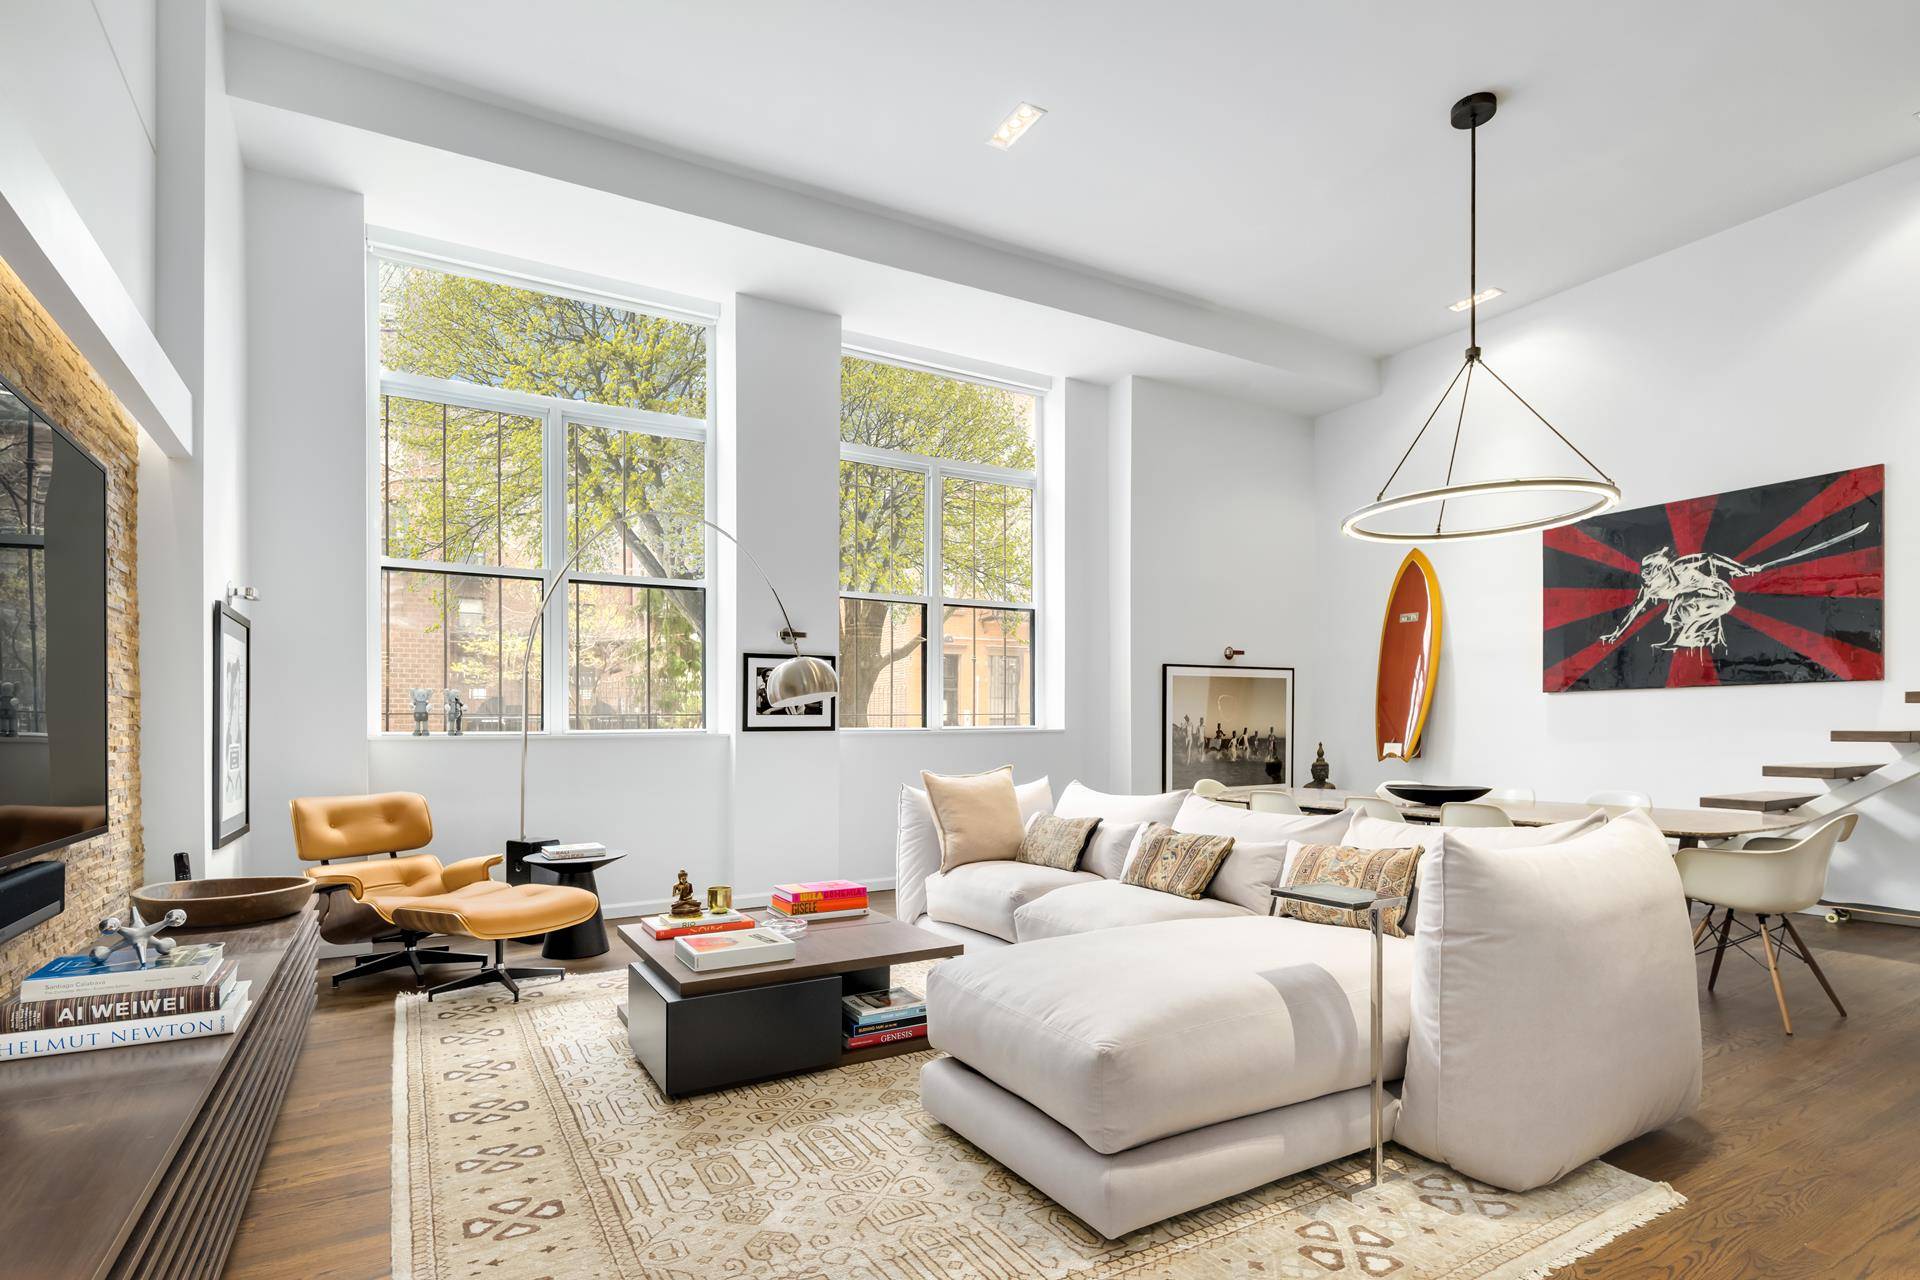 A Truly One of a Kind 1 or 2 Bedroom Loft Apartment with 2 Full Bathrooms in the Heart of West Village !